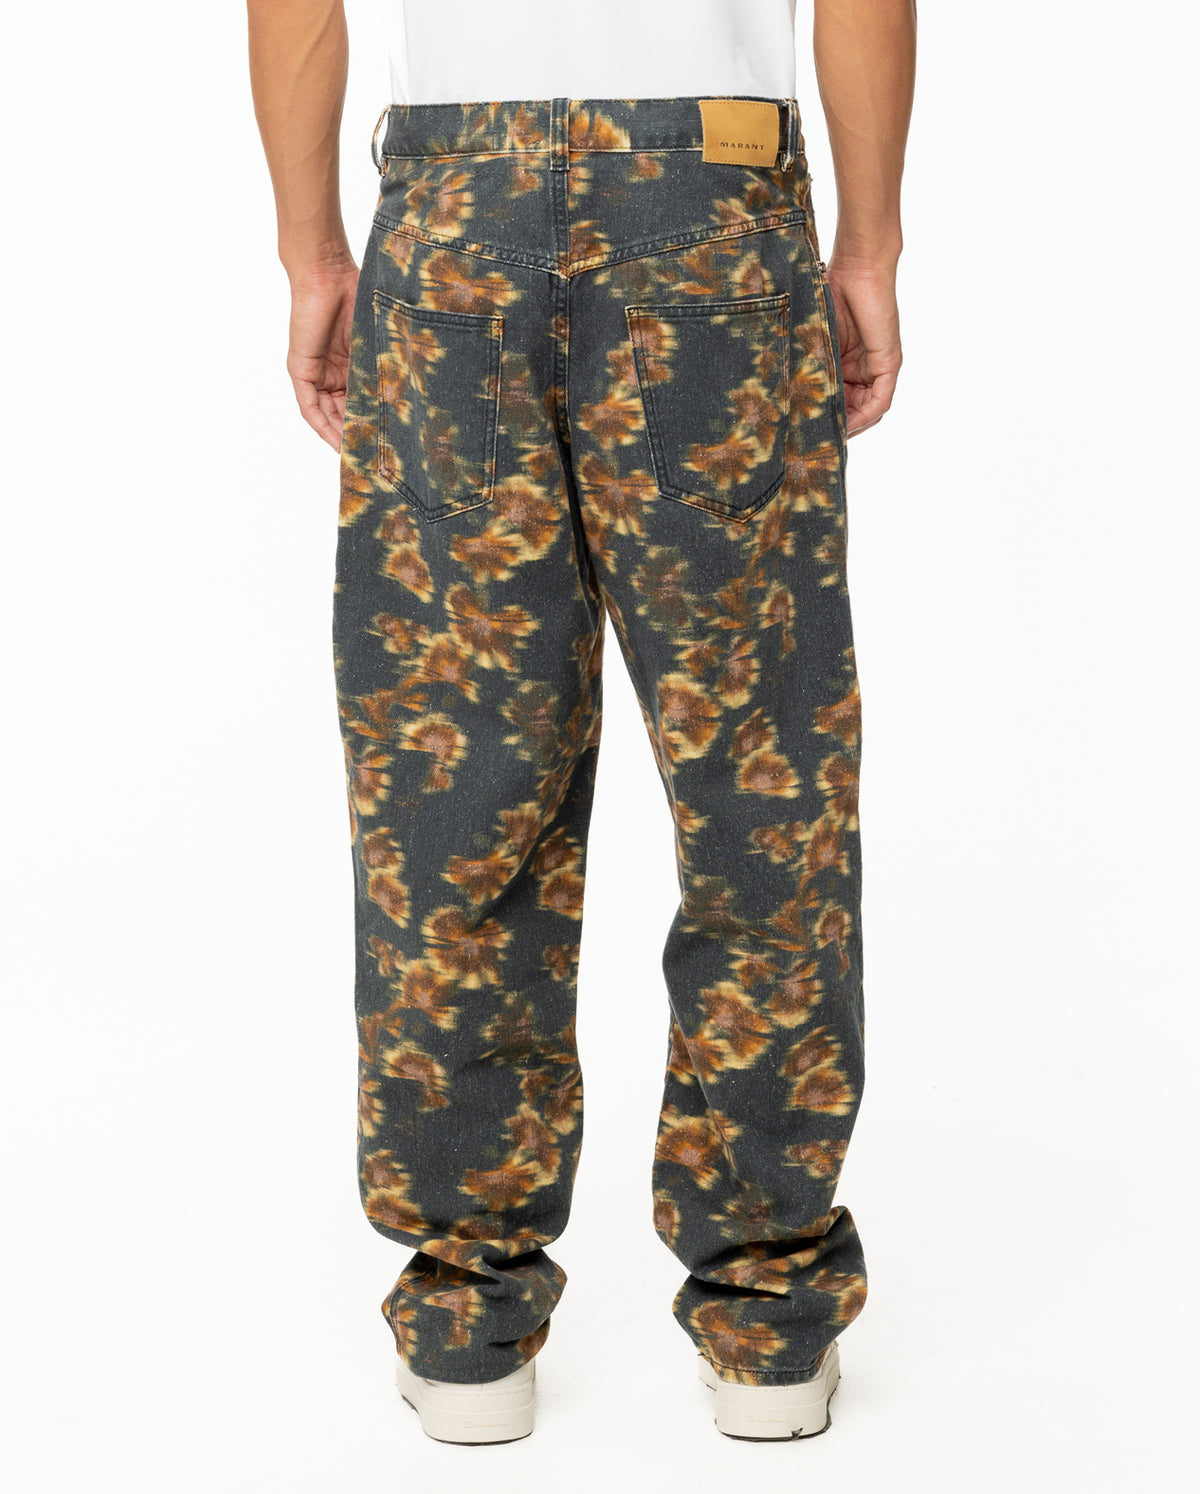 Jippoly Jean With Floral Print - Faded Black